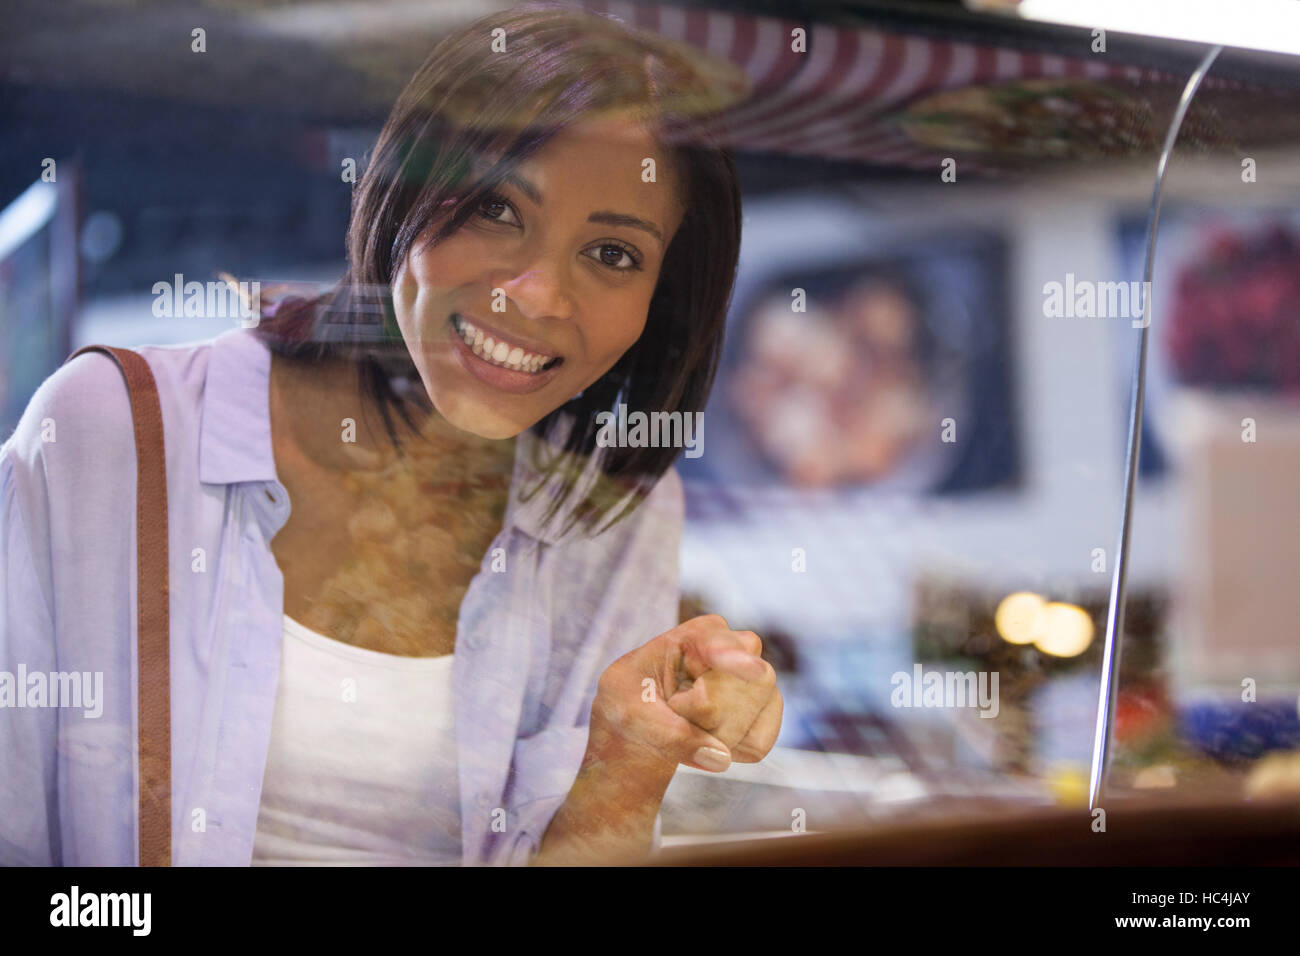 Excited woman pointing at display Stock Photo